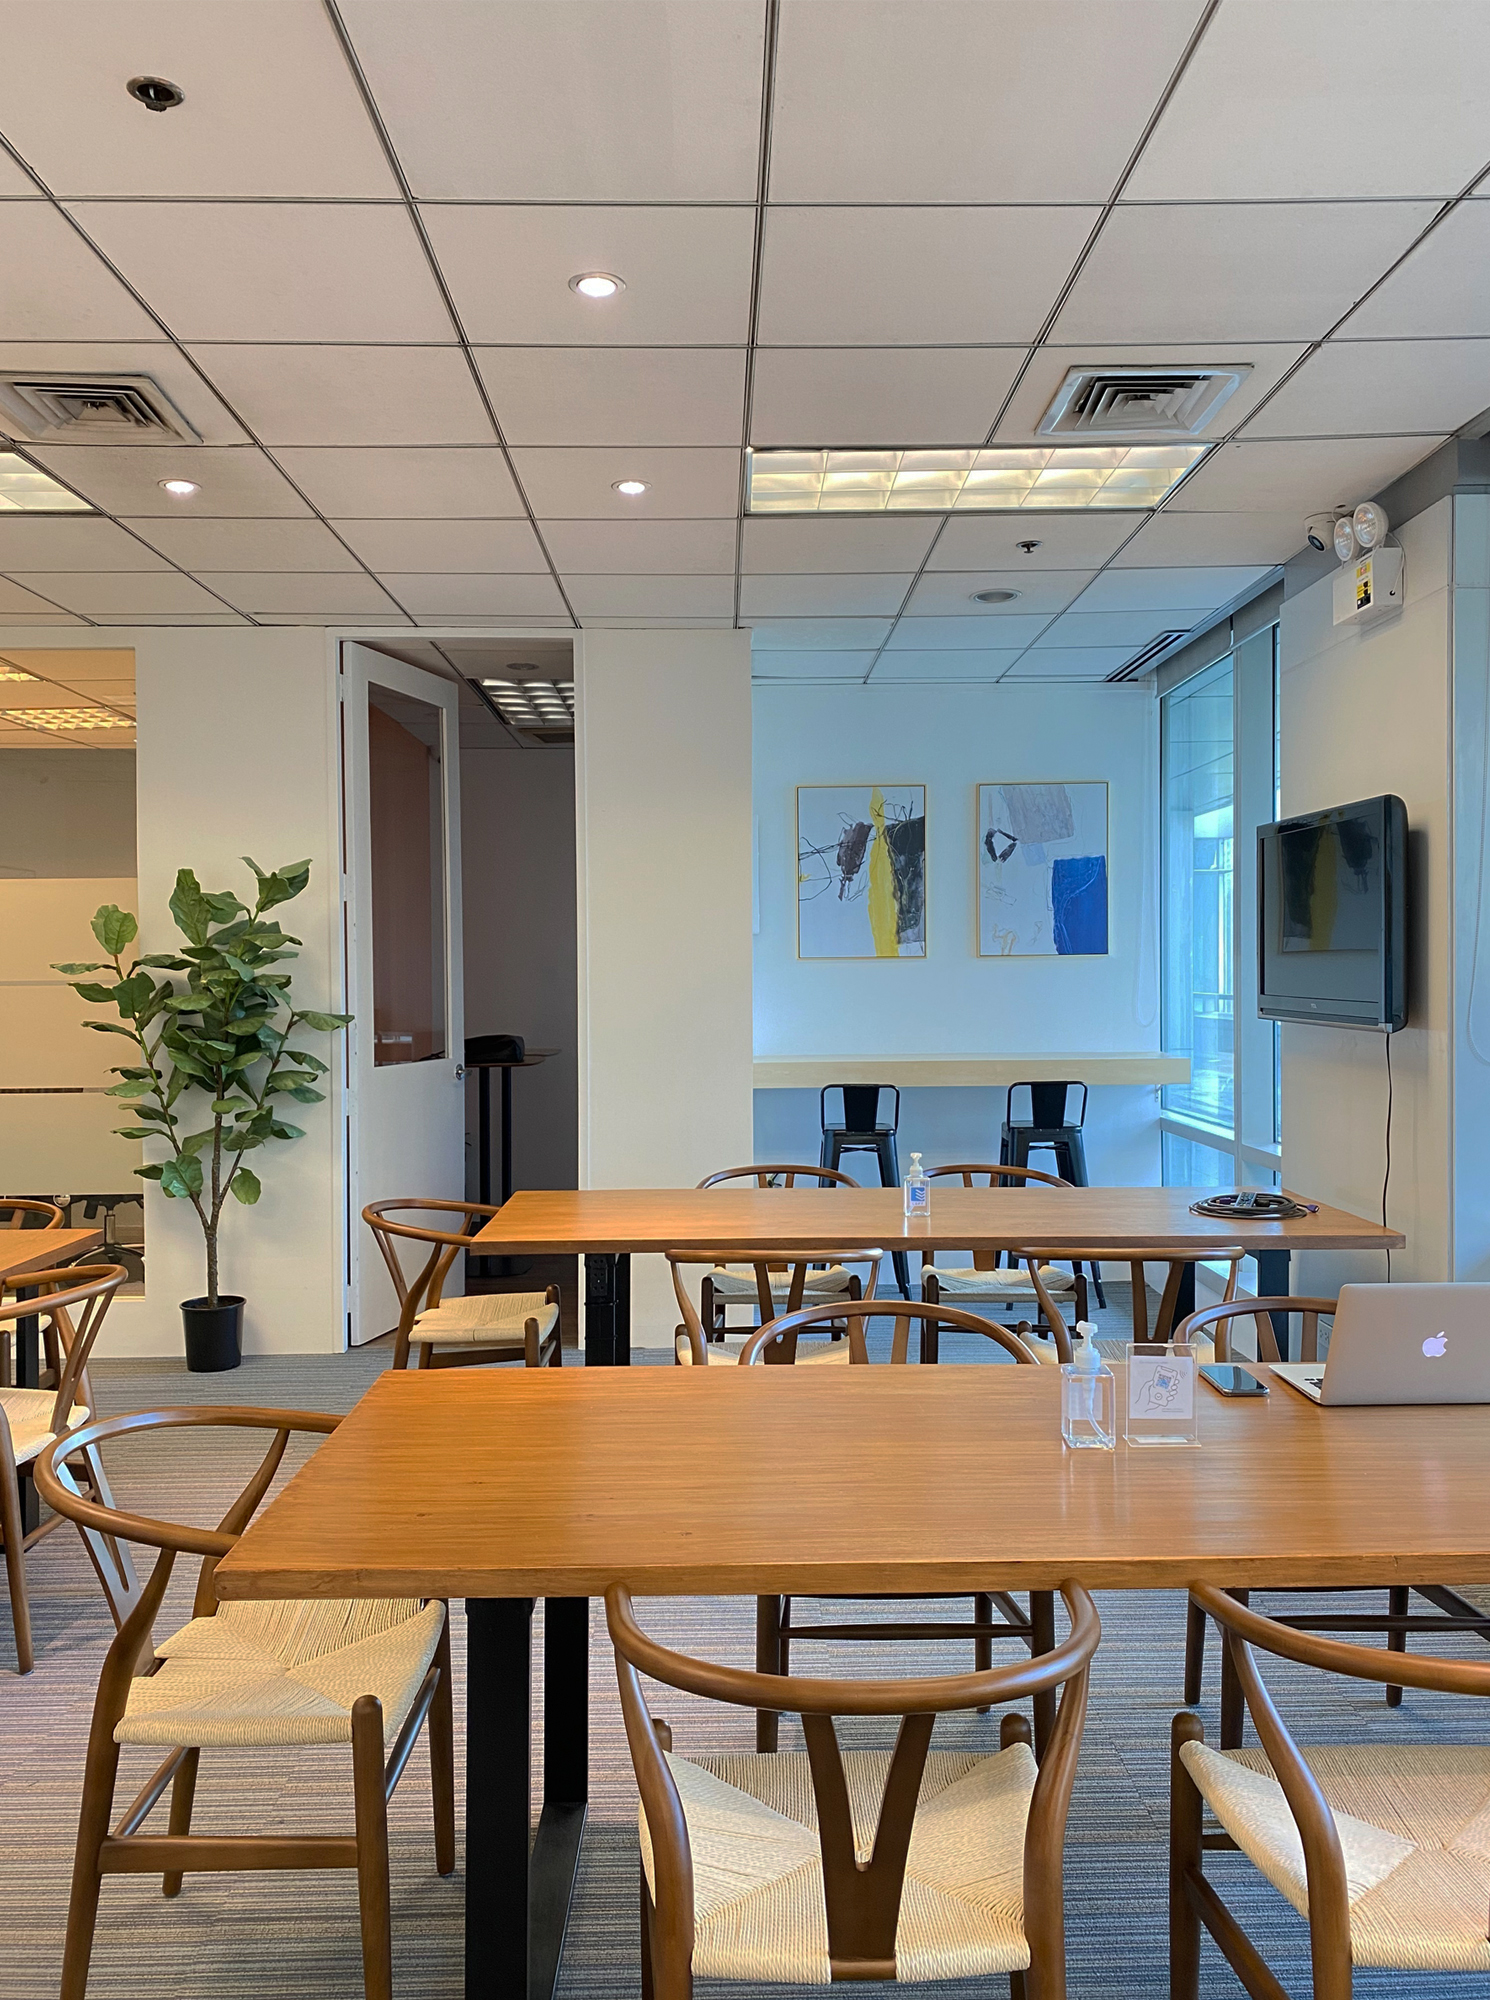 We Accept Private Bookings of Our Meeting Spaces in Ortigas, BGC & Makati